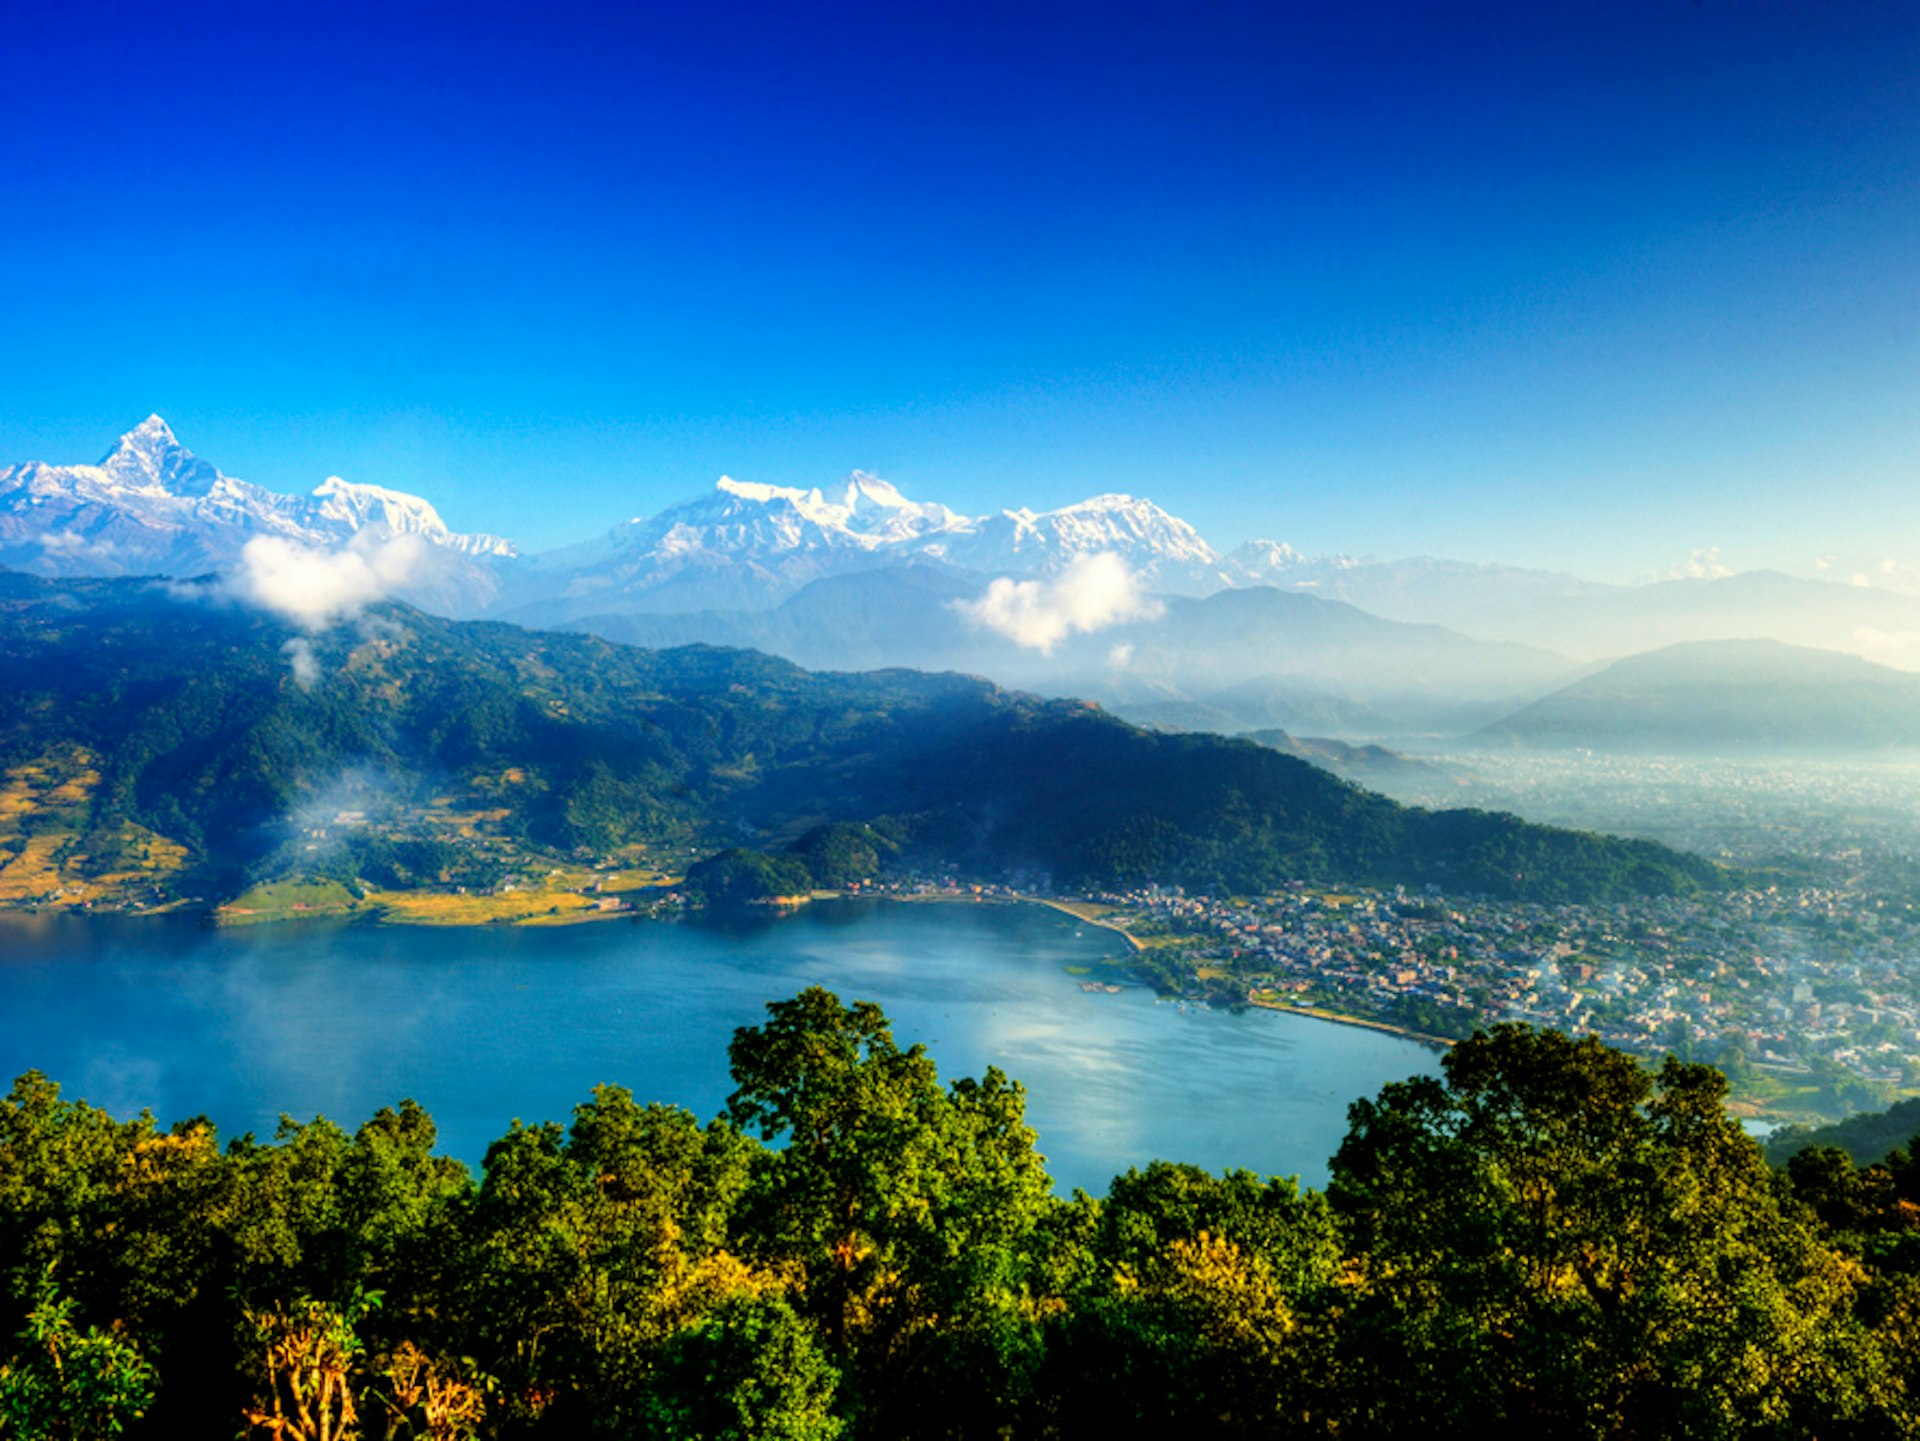 Misty morning light over Pokhara. Image by Mike Behnken / CC By 2.0 ND